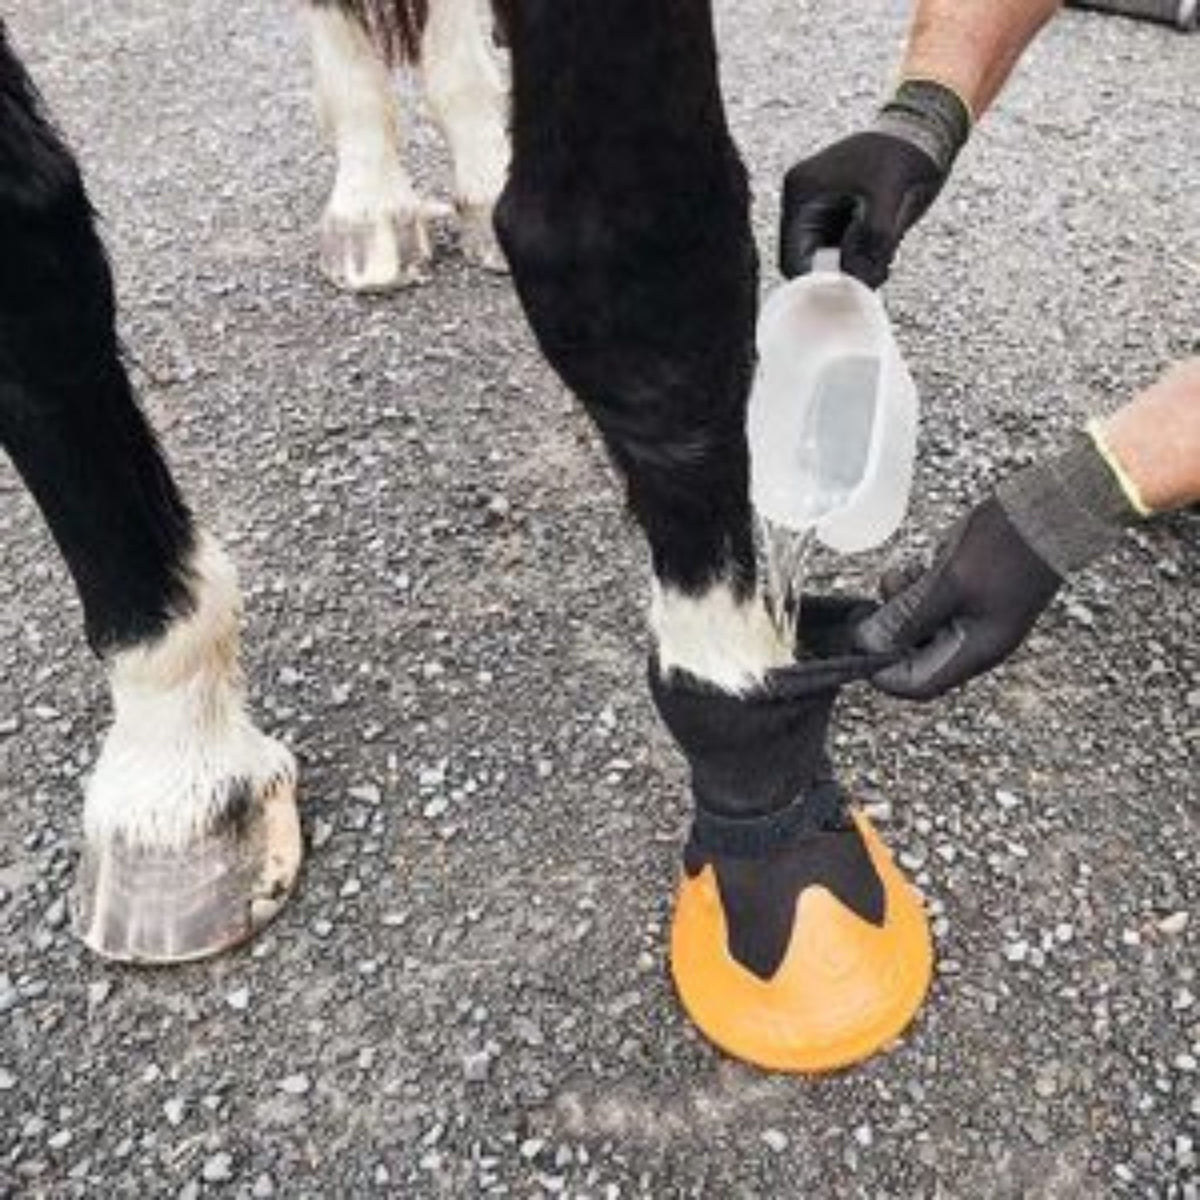 Pouring water into hoof socks